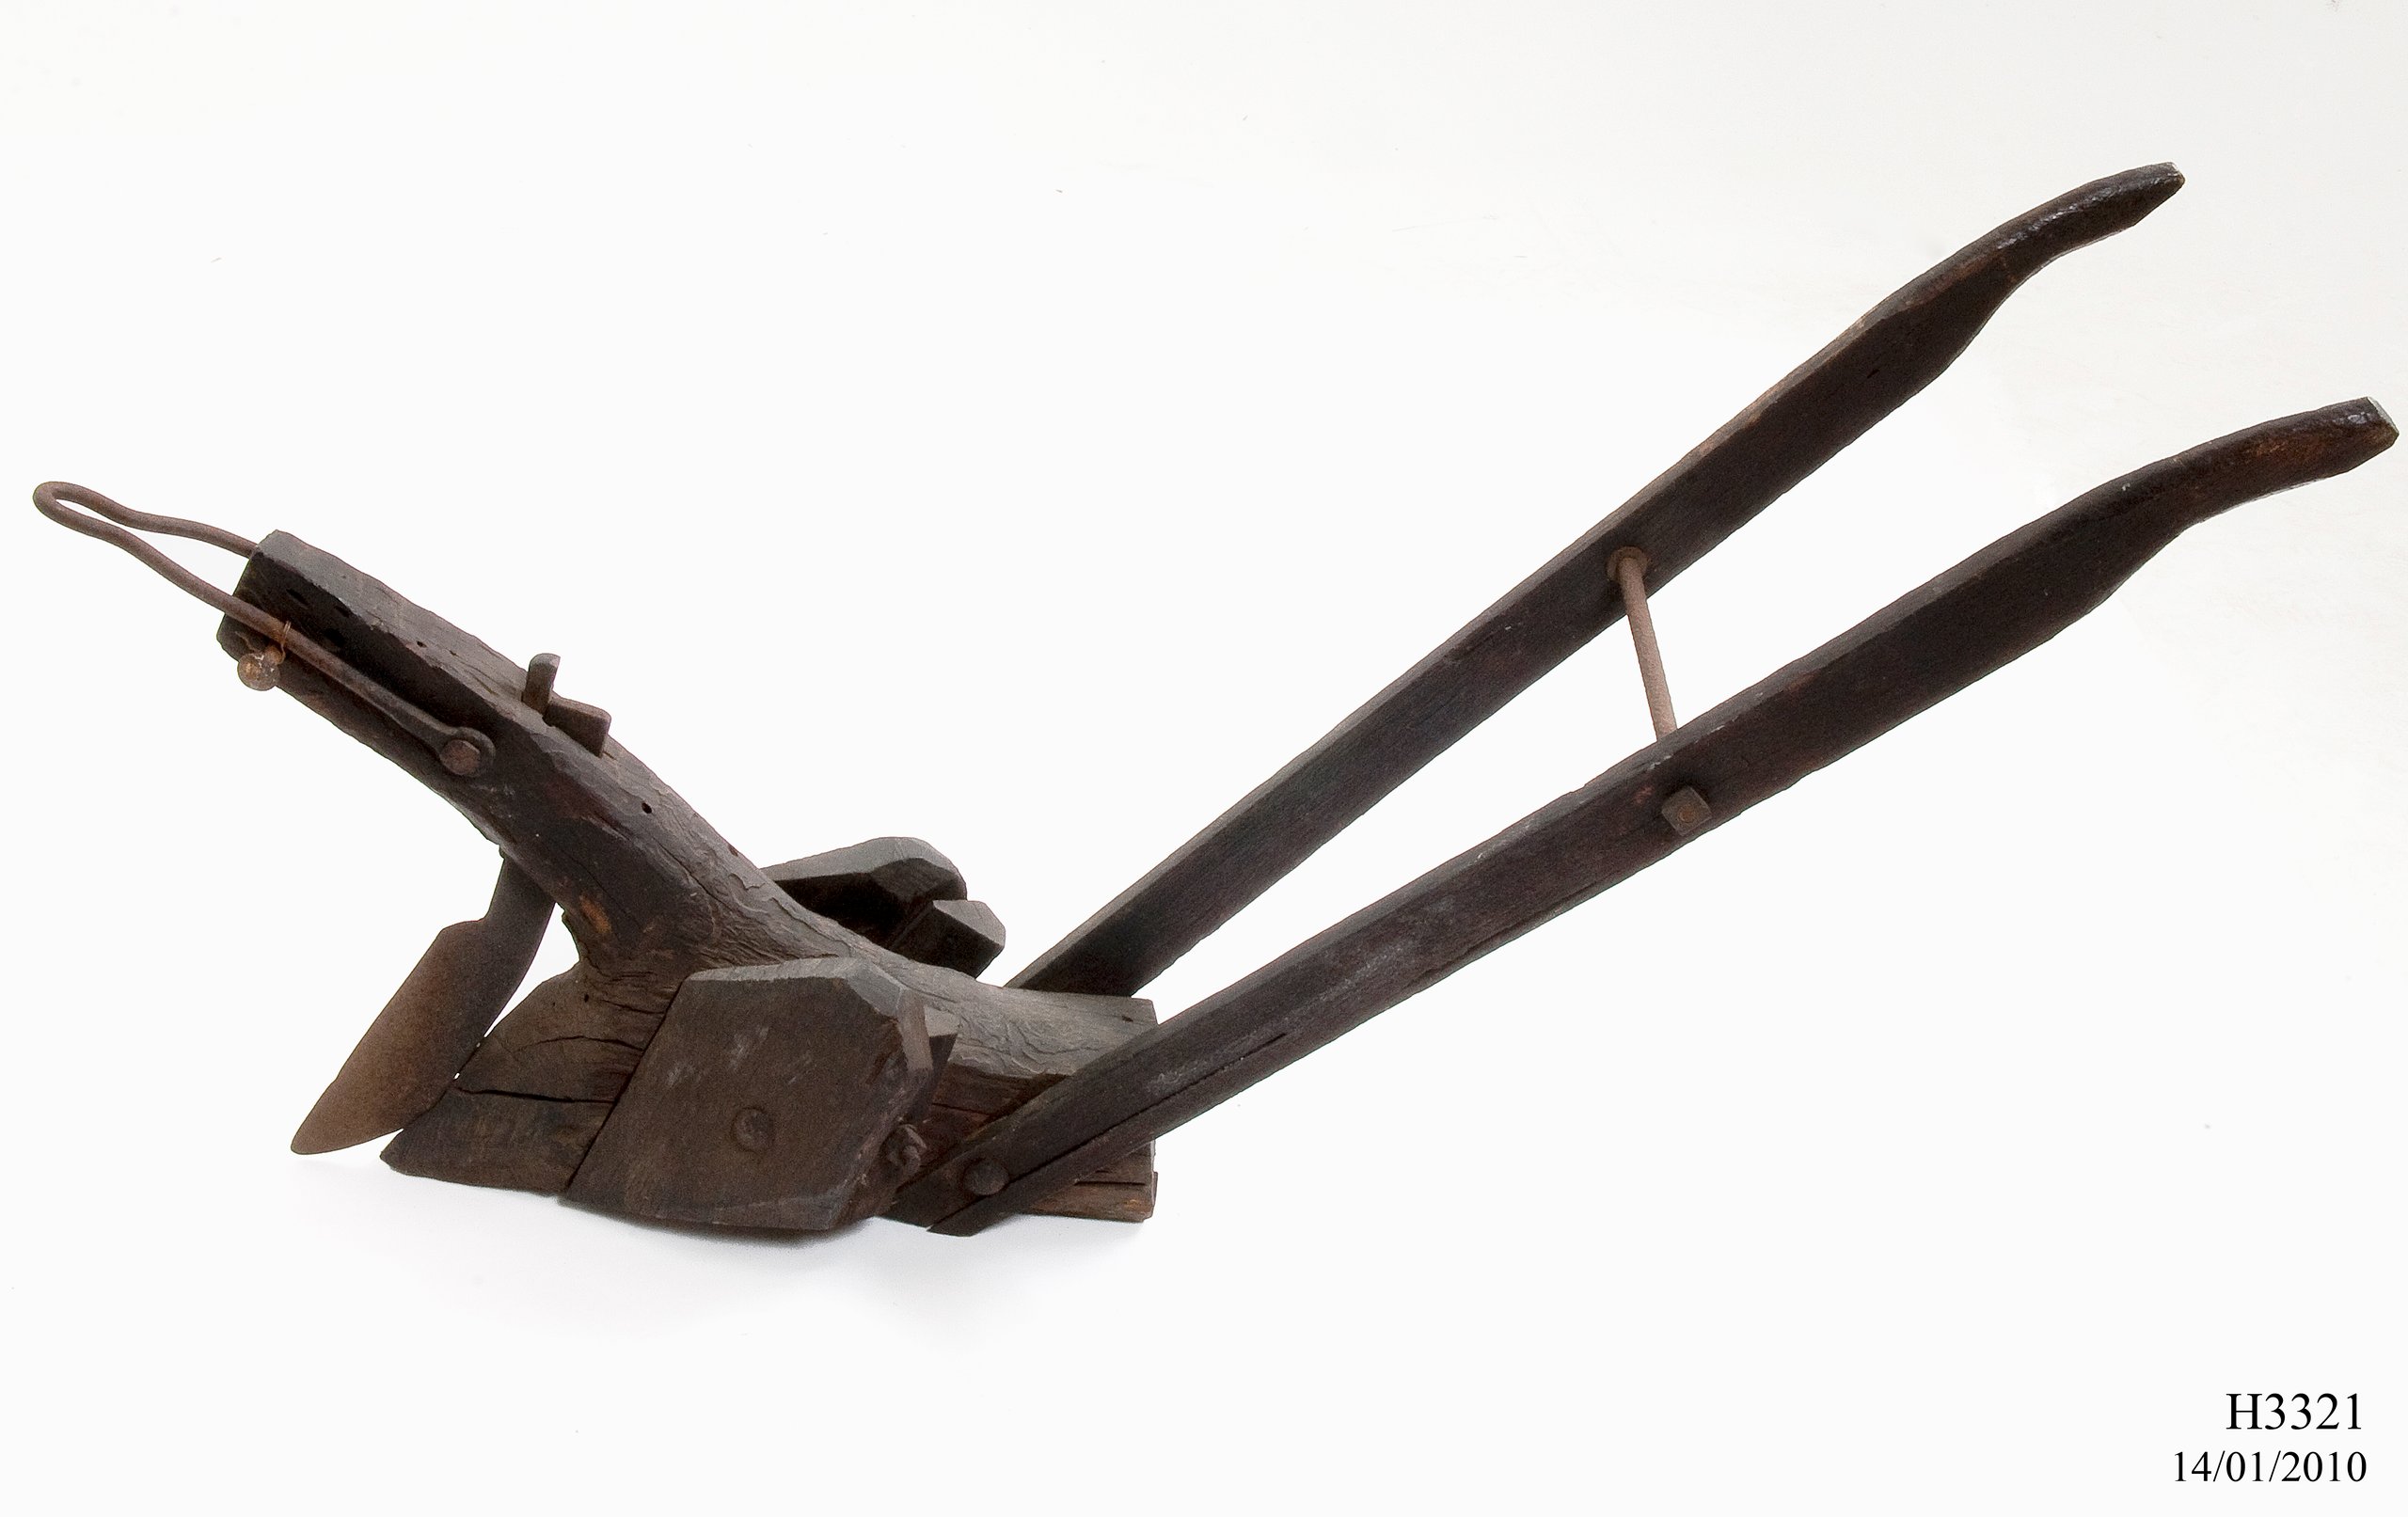 Mouldboard plough attributed to James Ruse